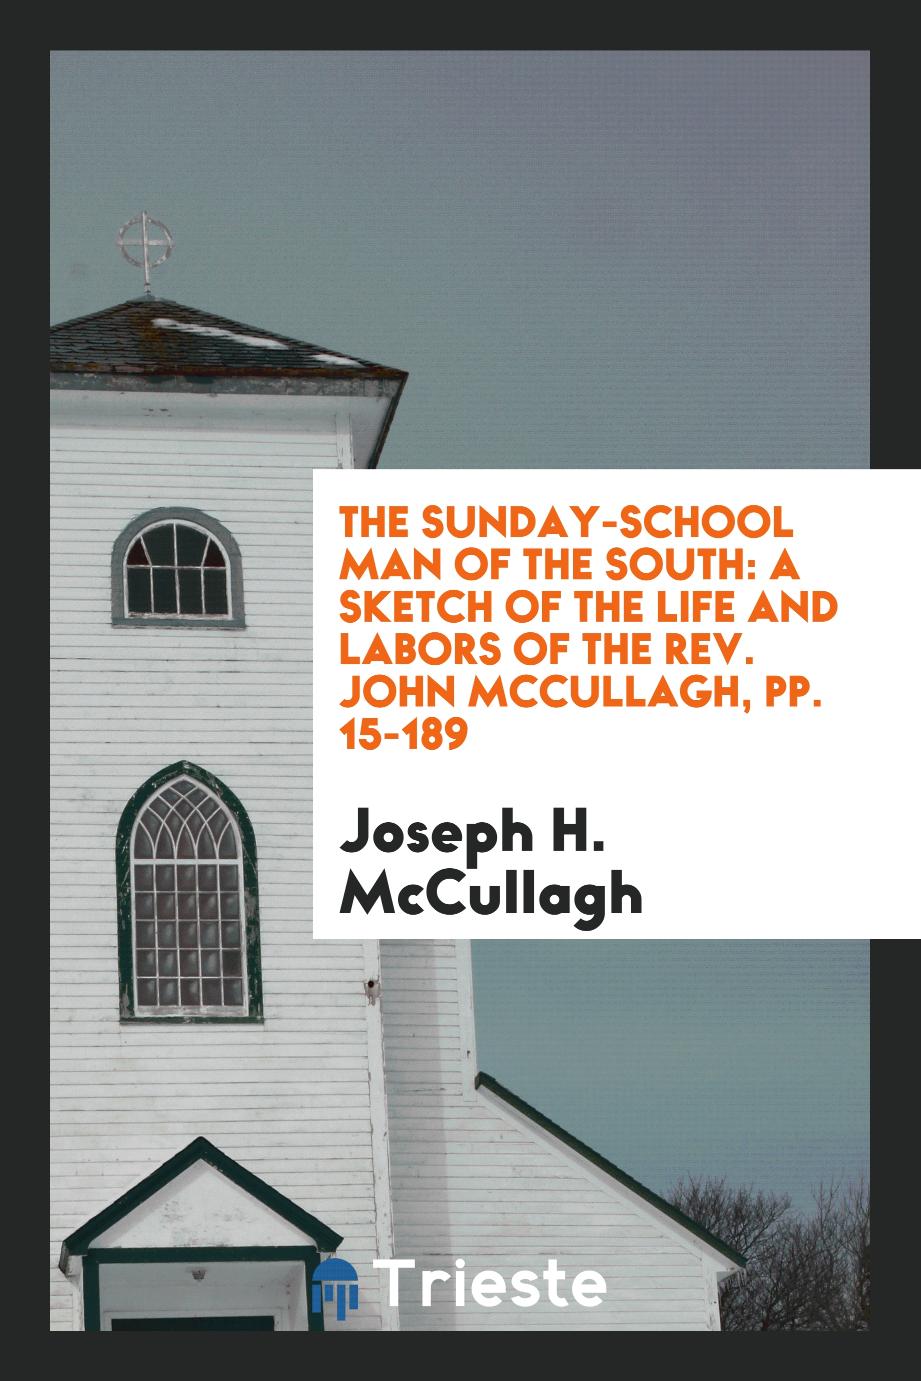 The Sunday-School Man of the South: A Sketch of the Life and Labors of the Rev. John McCullagh, pp. 15-189